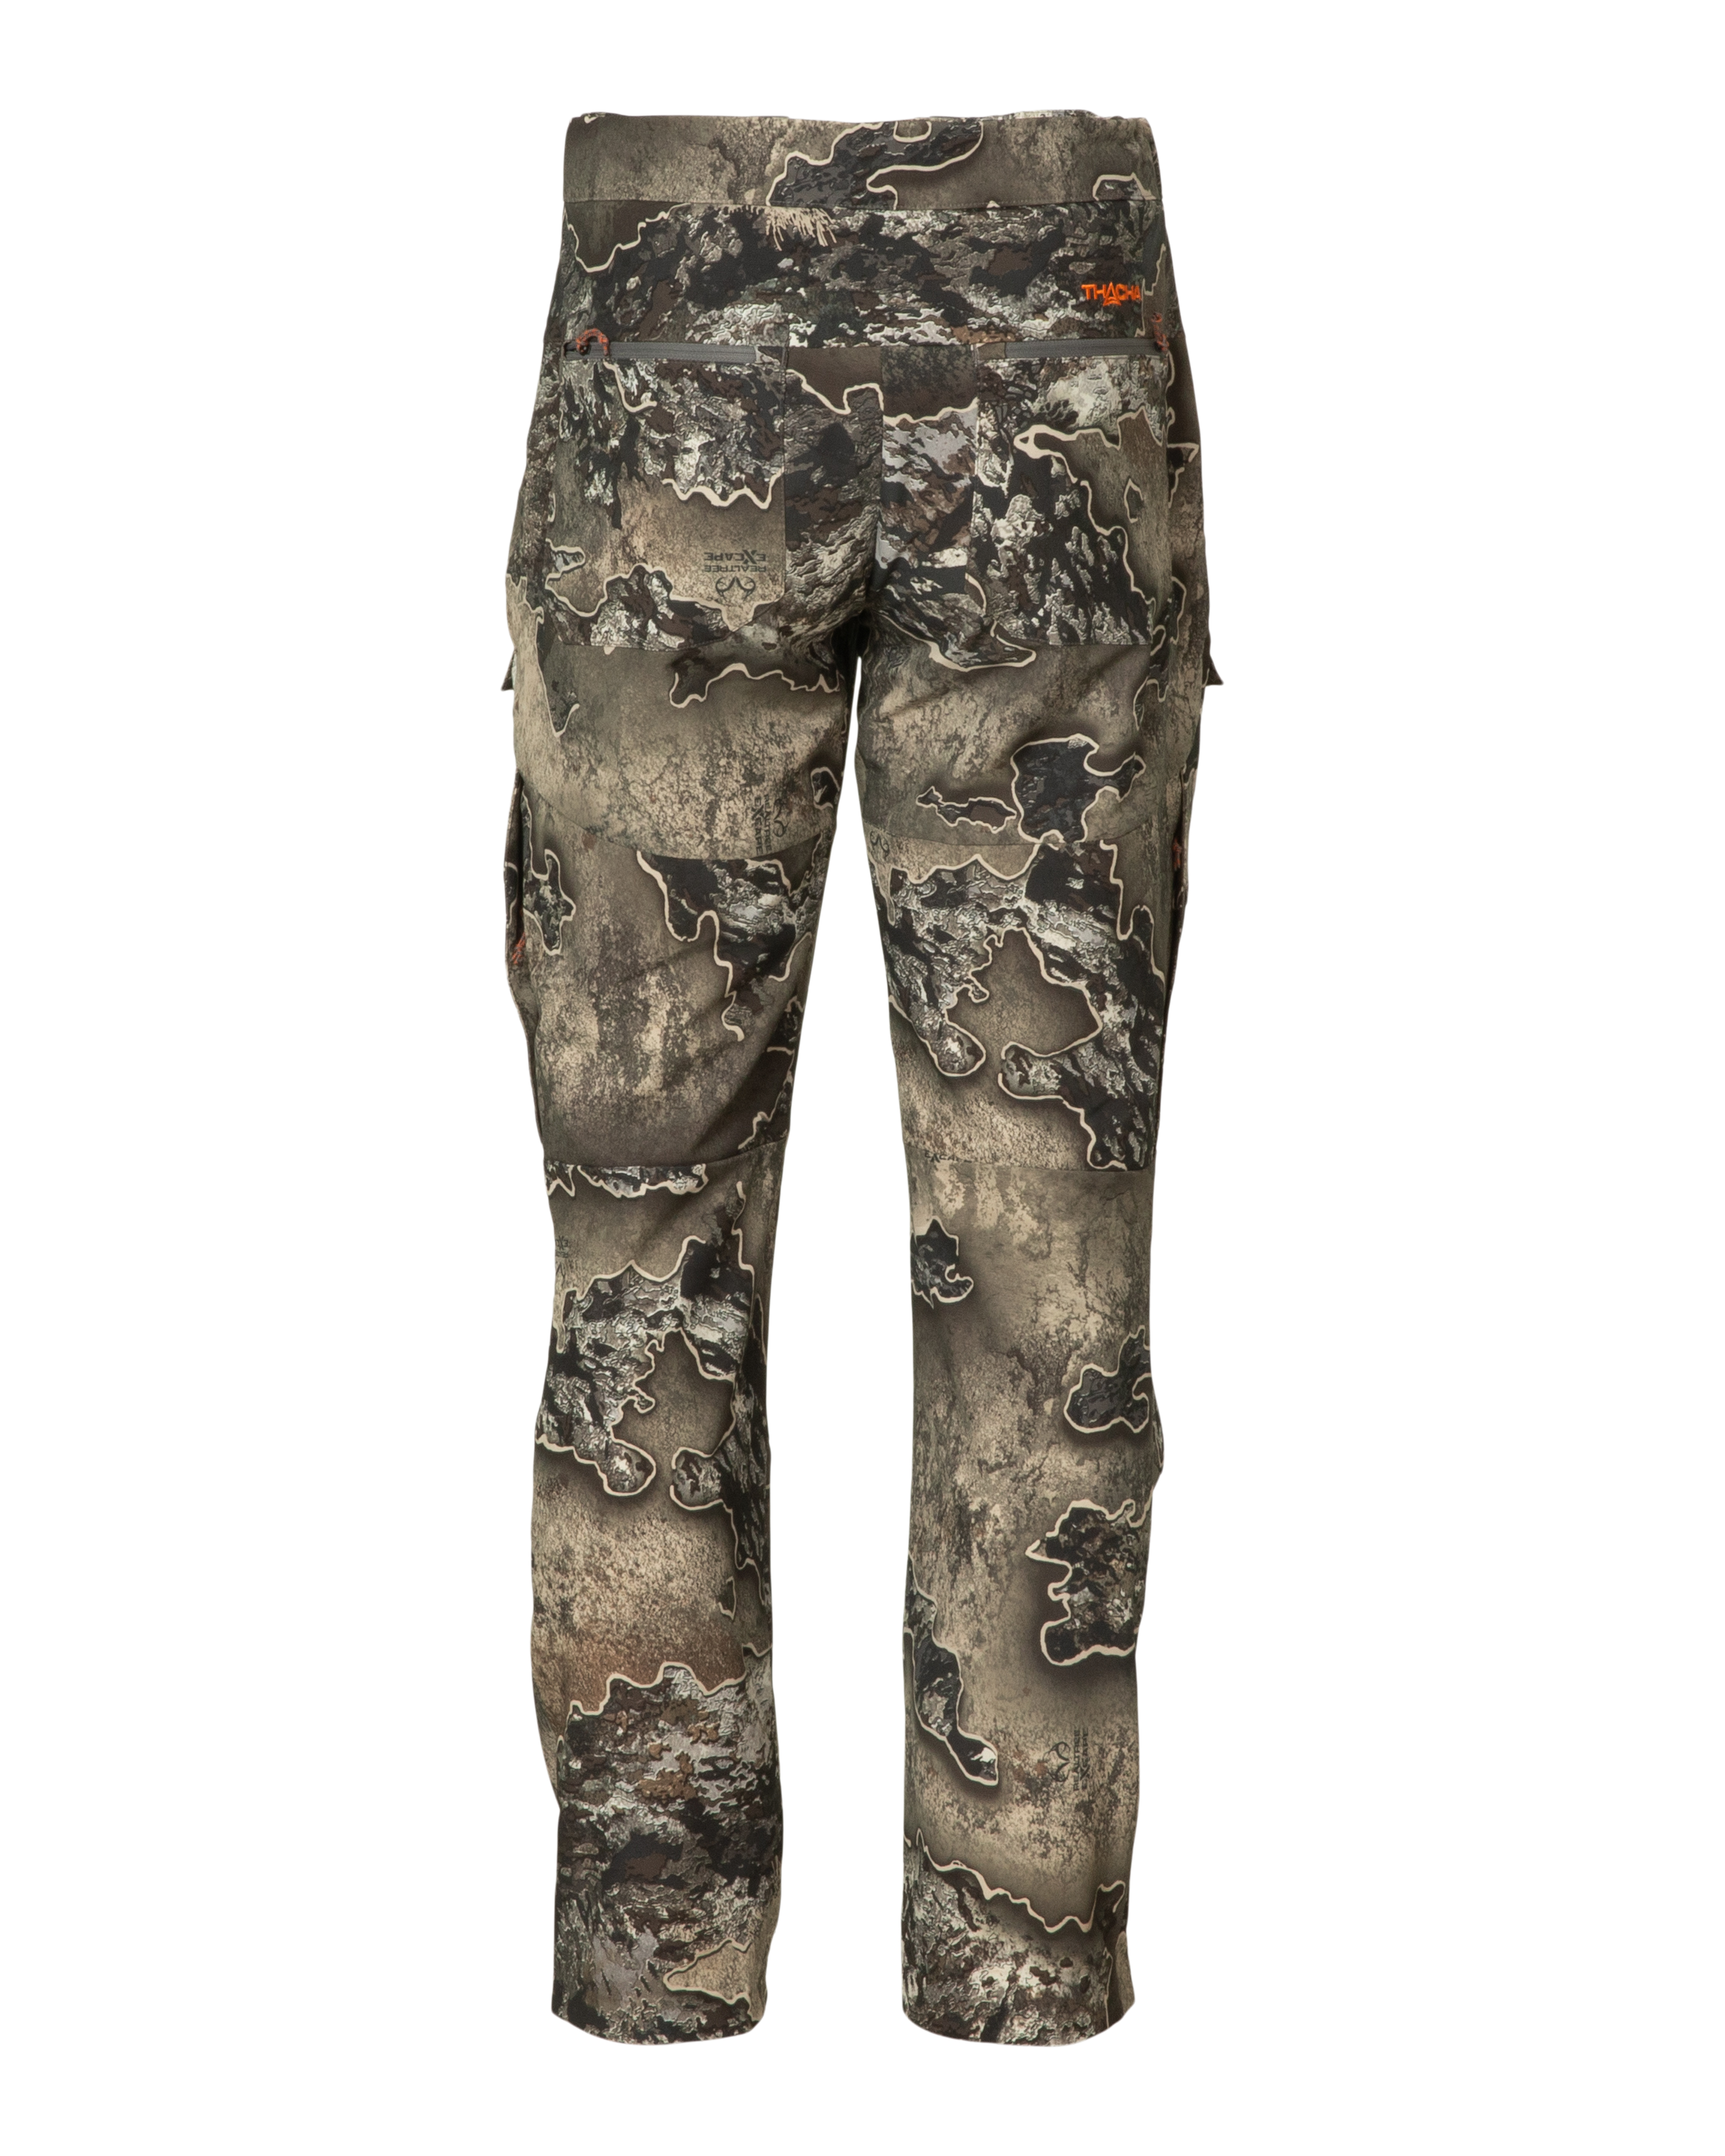 Banded Thacha Lightweight Hunting Men's Pants